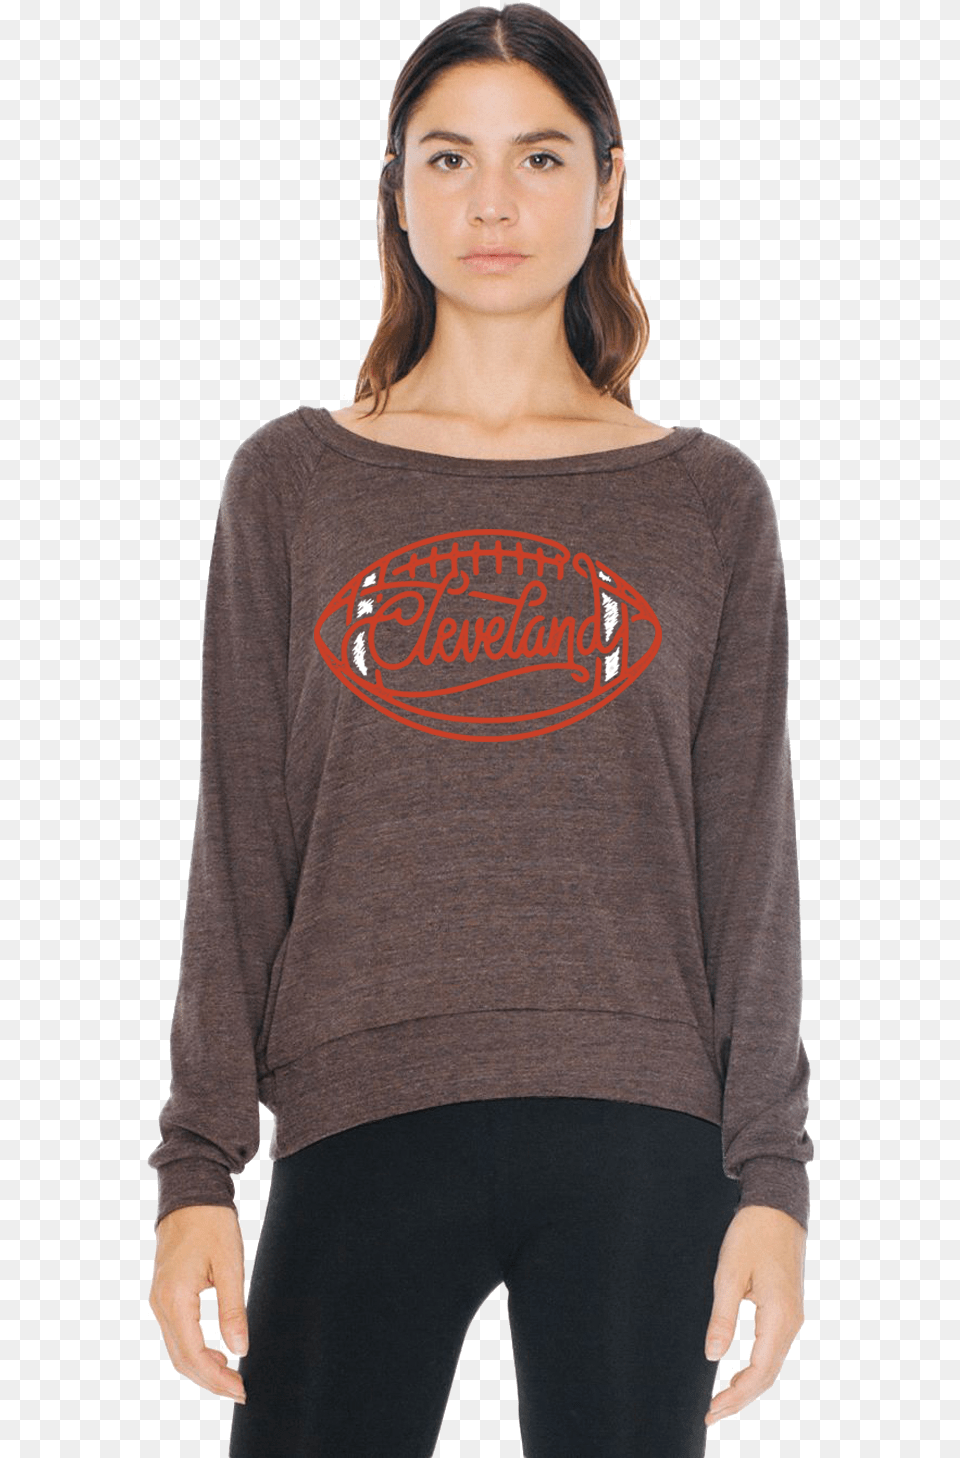 Of Cleveland Browns Football Girls Light Sweatshirt Long Sleeved T Shirt, Adult, Sweater, Sleeve, Person Free Transparent Png